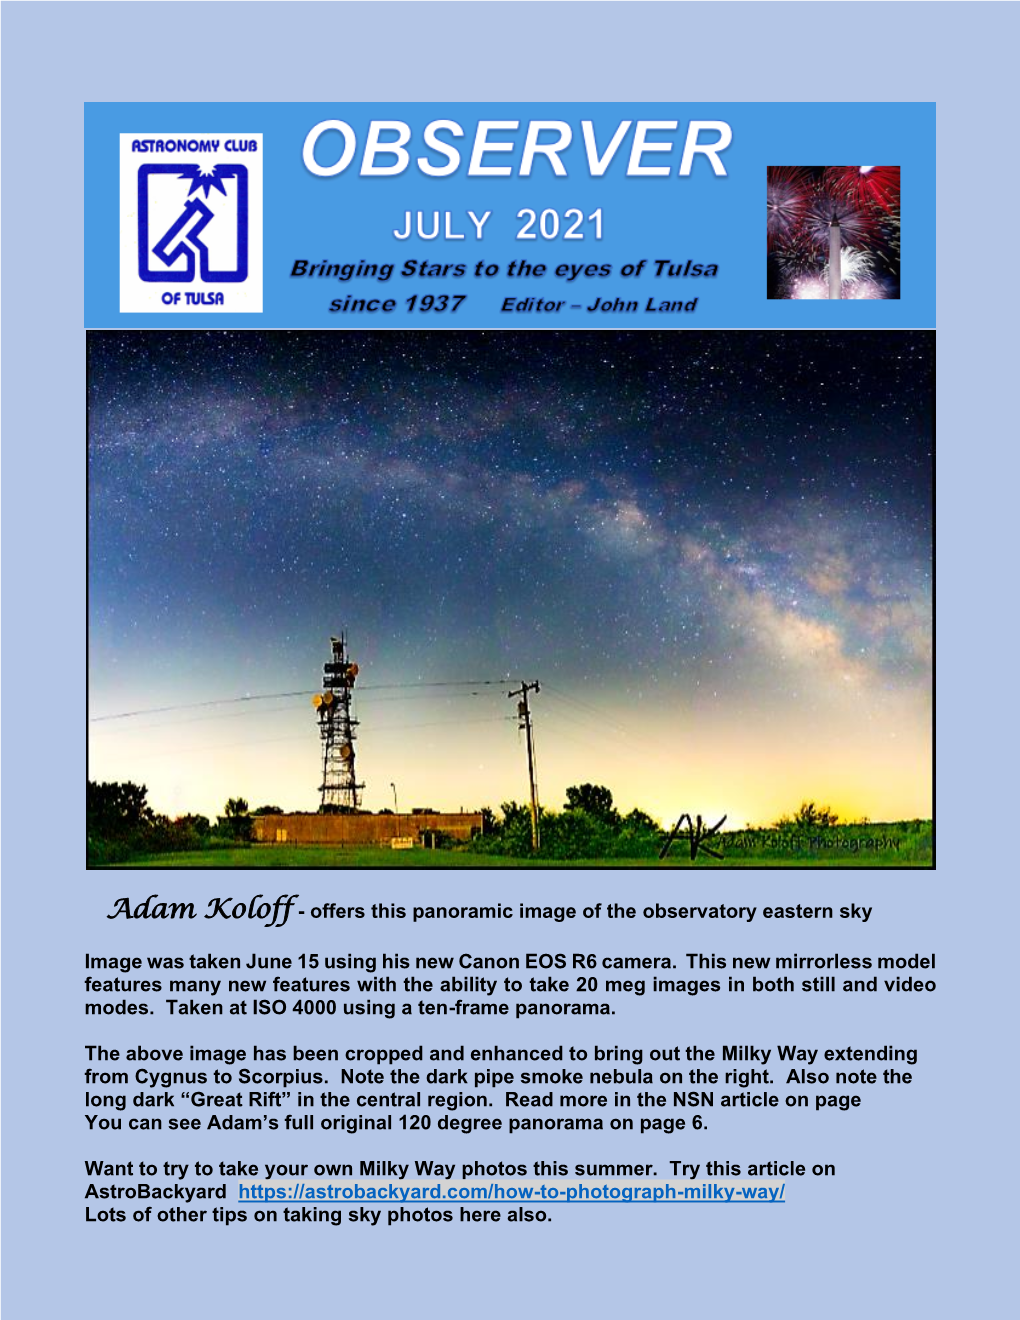 Adam Koloff - Offers This Panoramic Image of the Observatory Eastern Sky